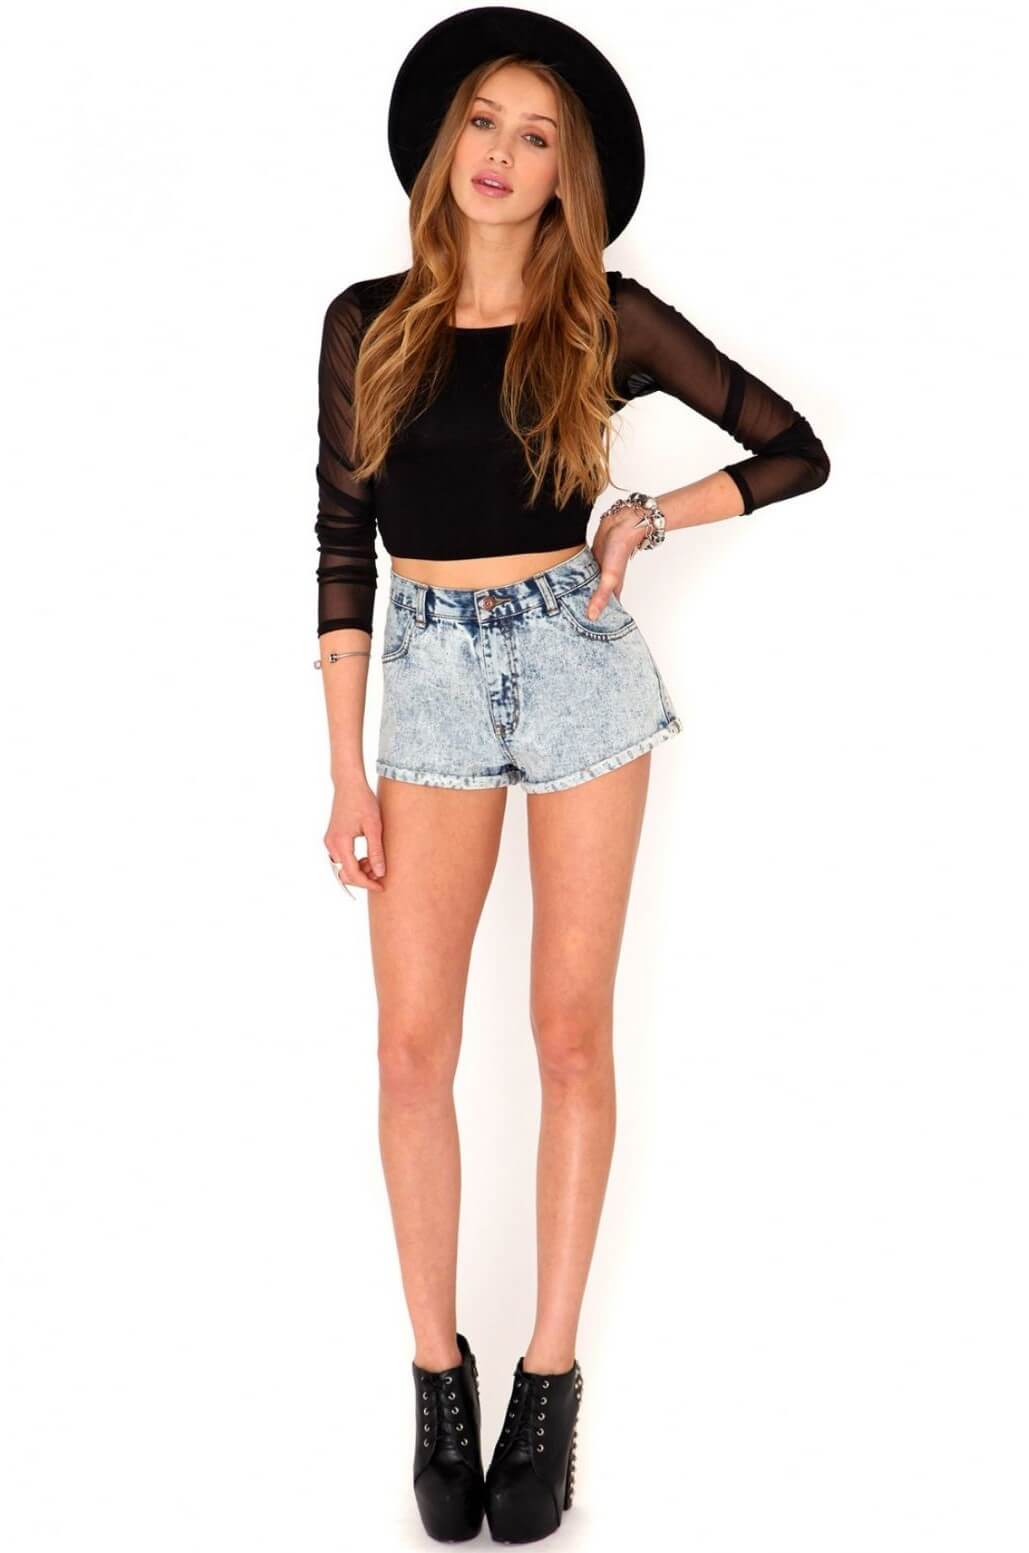 Cailin Russo  Perfect looks in Black Full Sleeves Crop Top With Denim shorts